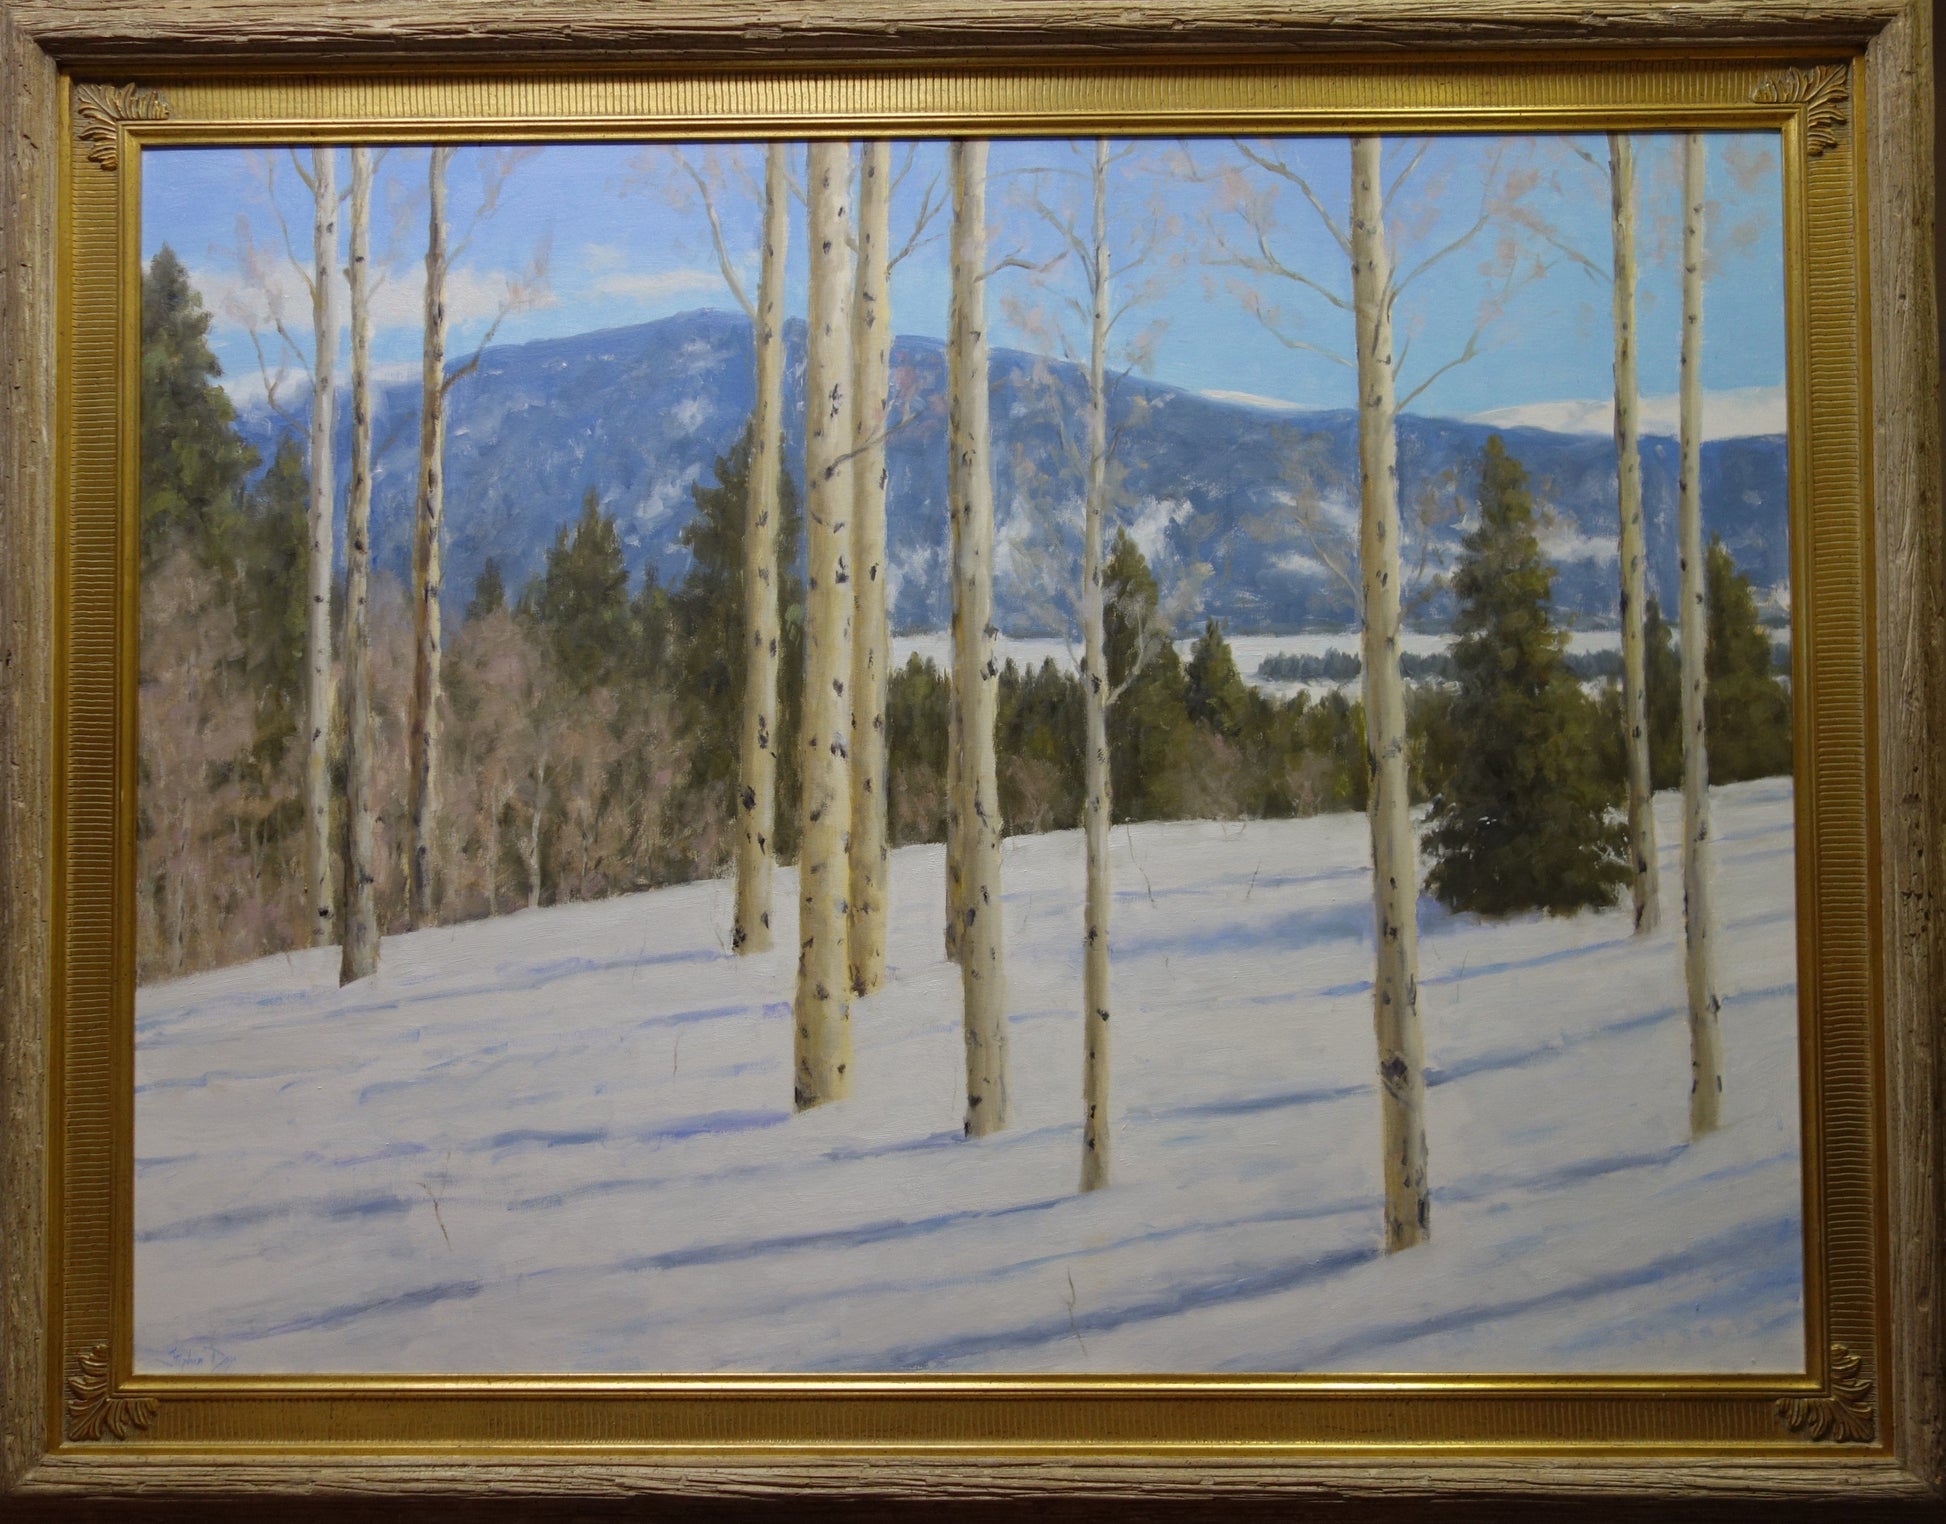 A Late Winter View-Painting-Stephen Day-Sorrel Sky Gallery